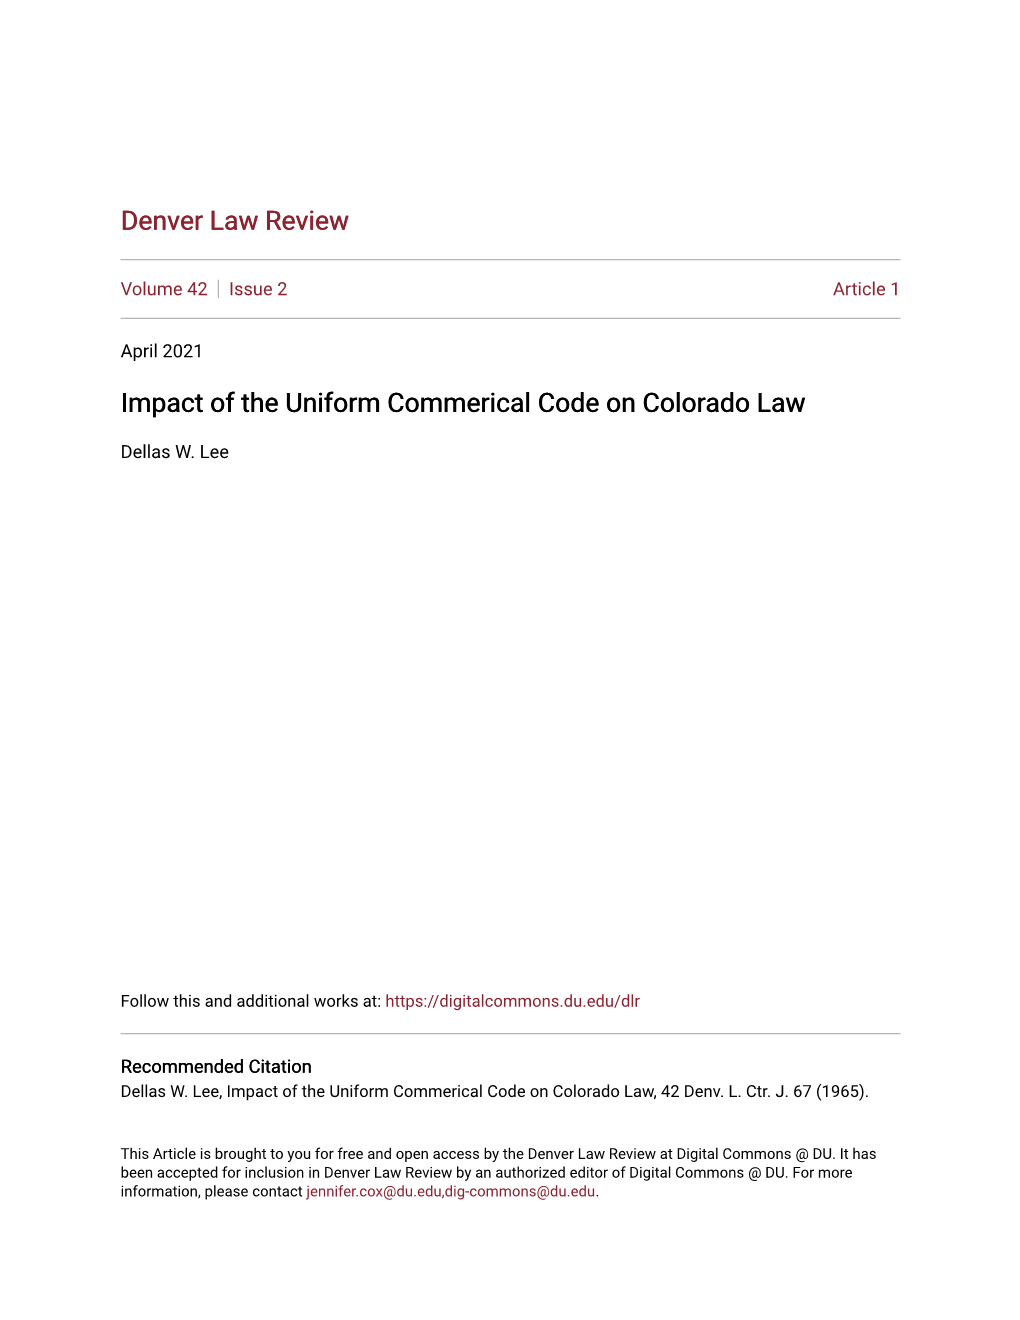 Impact of the Uniform Commerical Code on Colorado Law